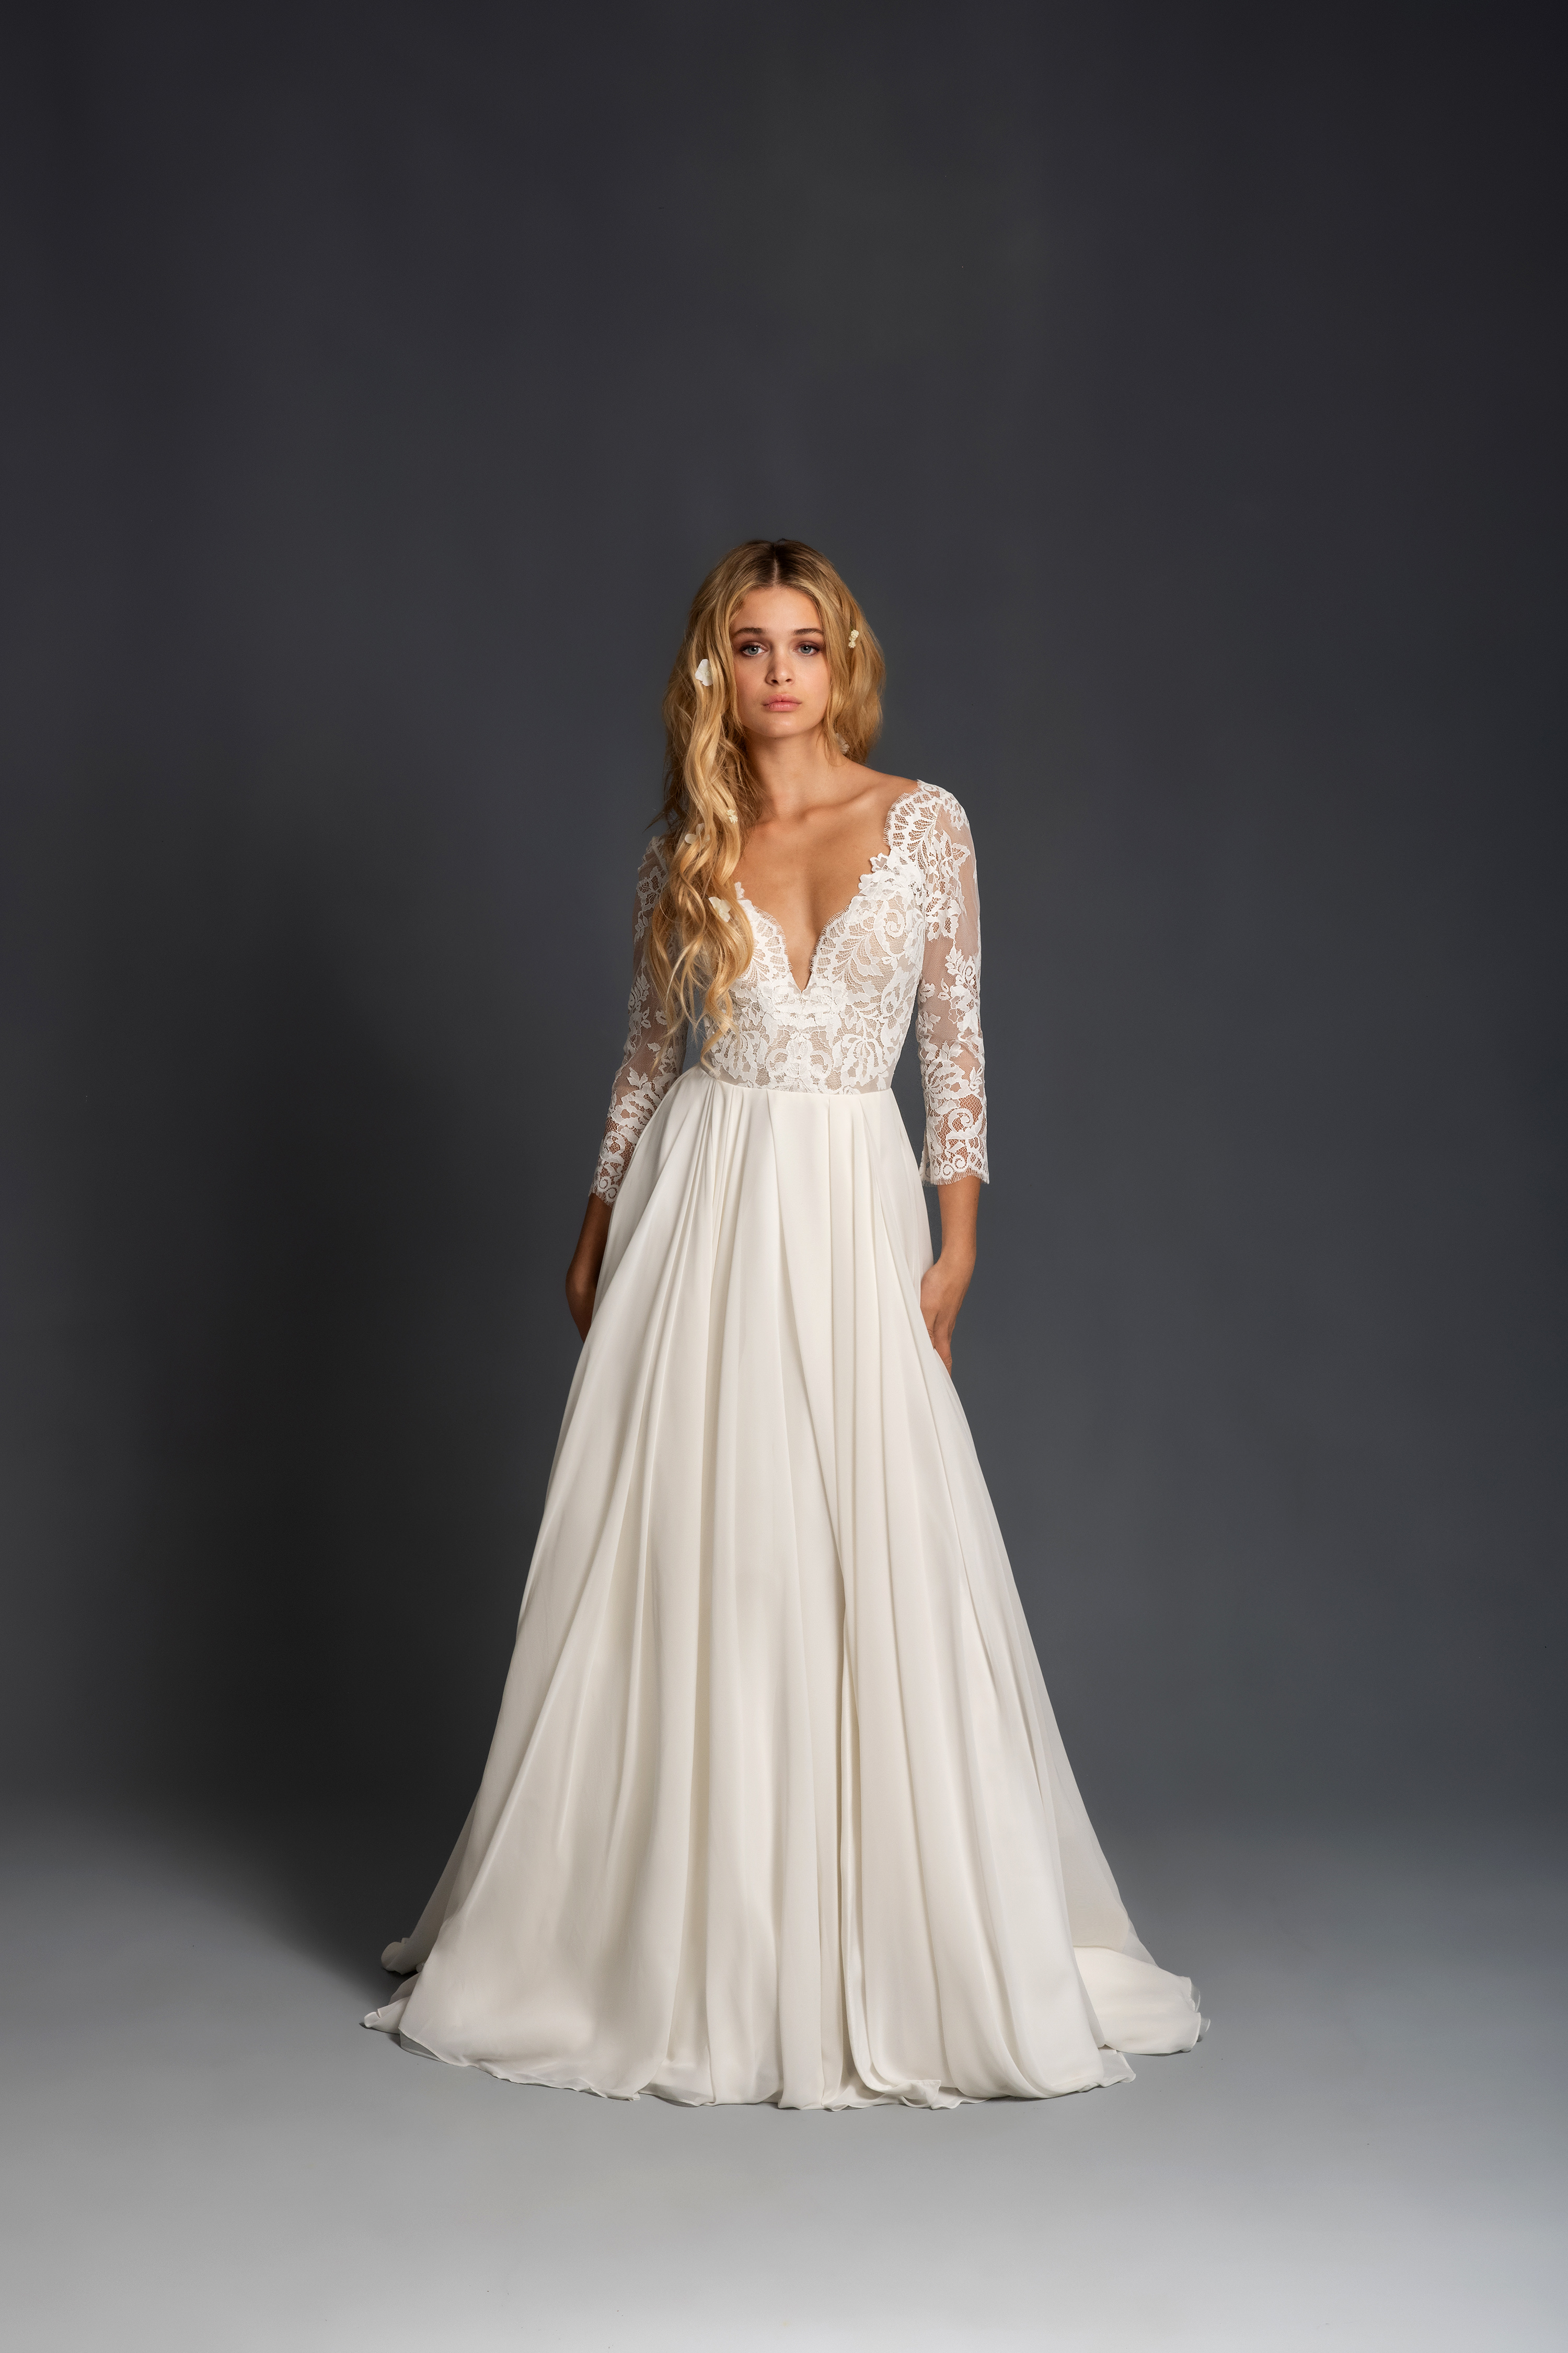 Blush by Hayley Paige Spring 2020 Wedding Dress Collection Martha